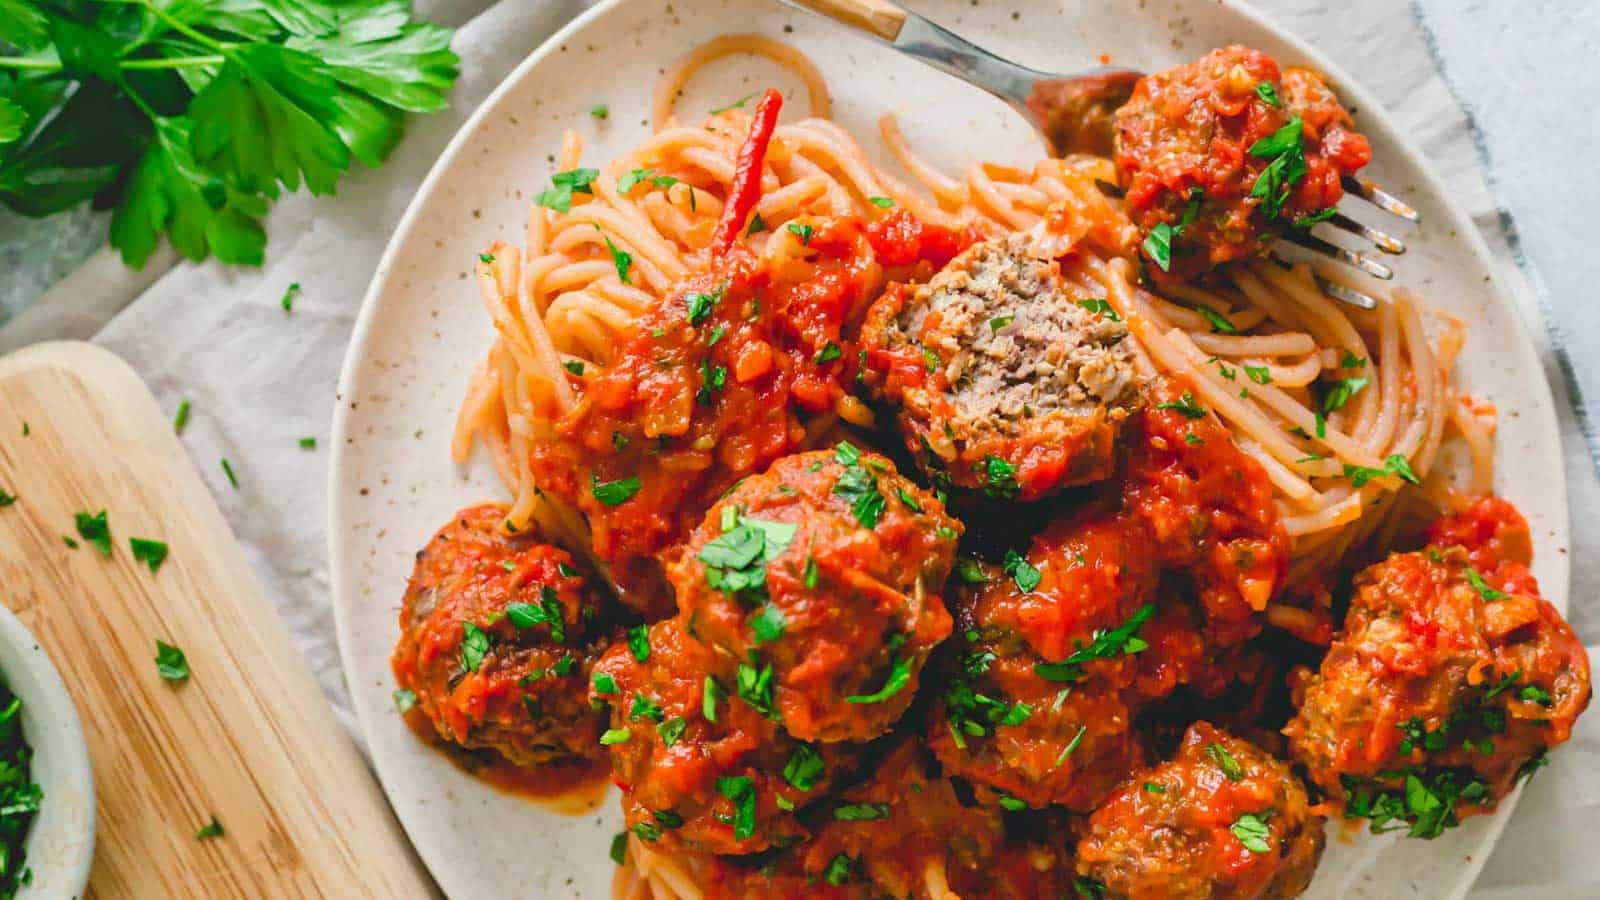 Venison meatballs in tomato sauce on a plate with pasta.